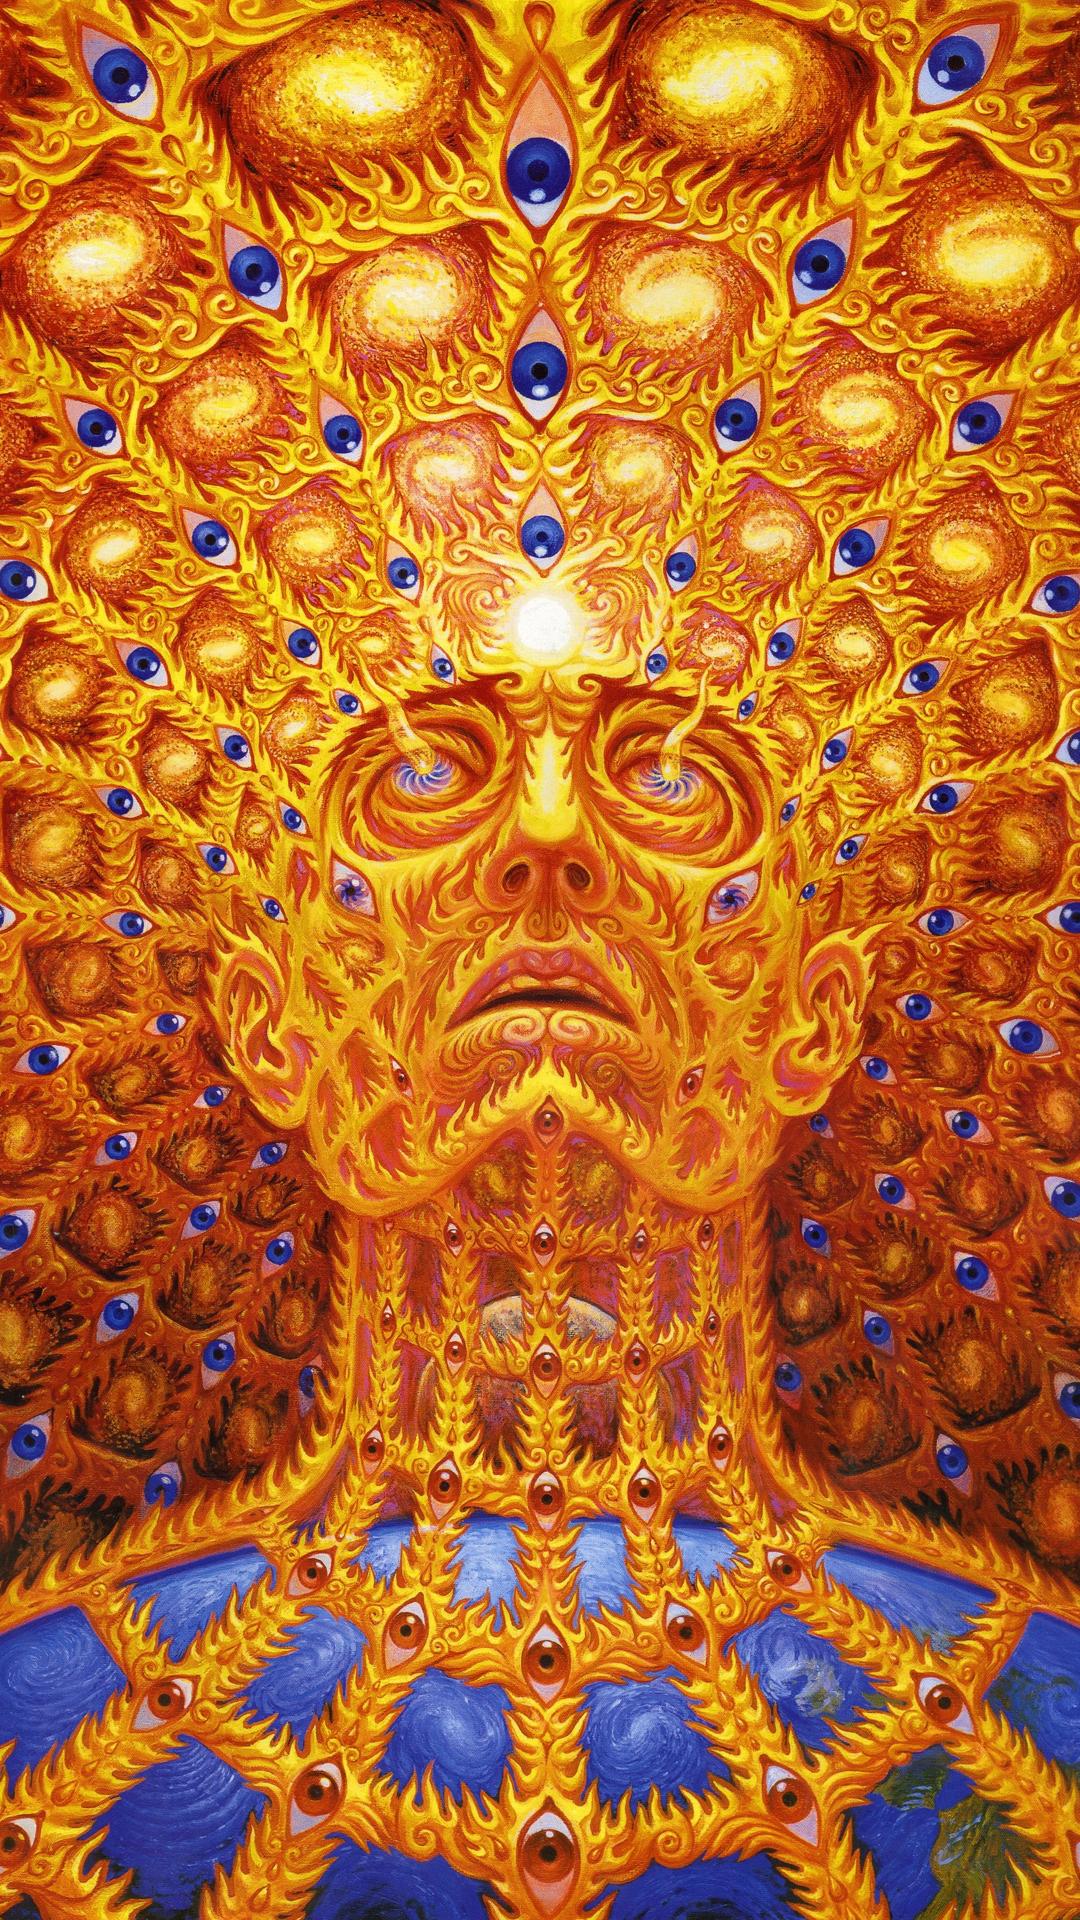 Alex Grey image I edited for your phone wallpaper or lock screen. Enjoy!: DMT